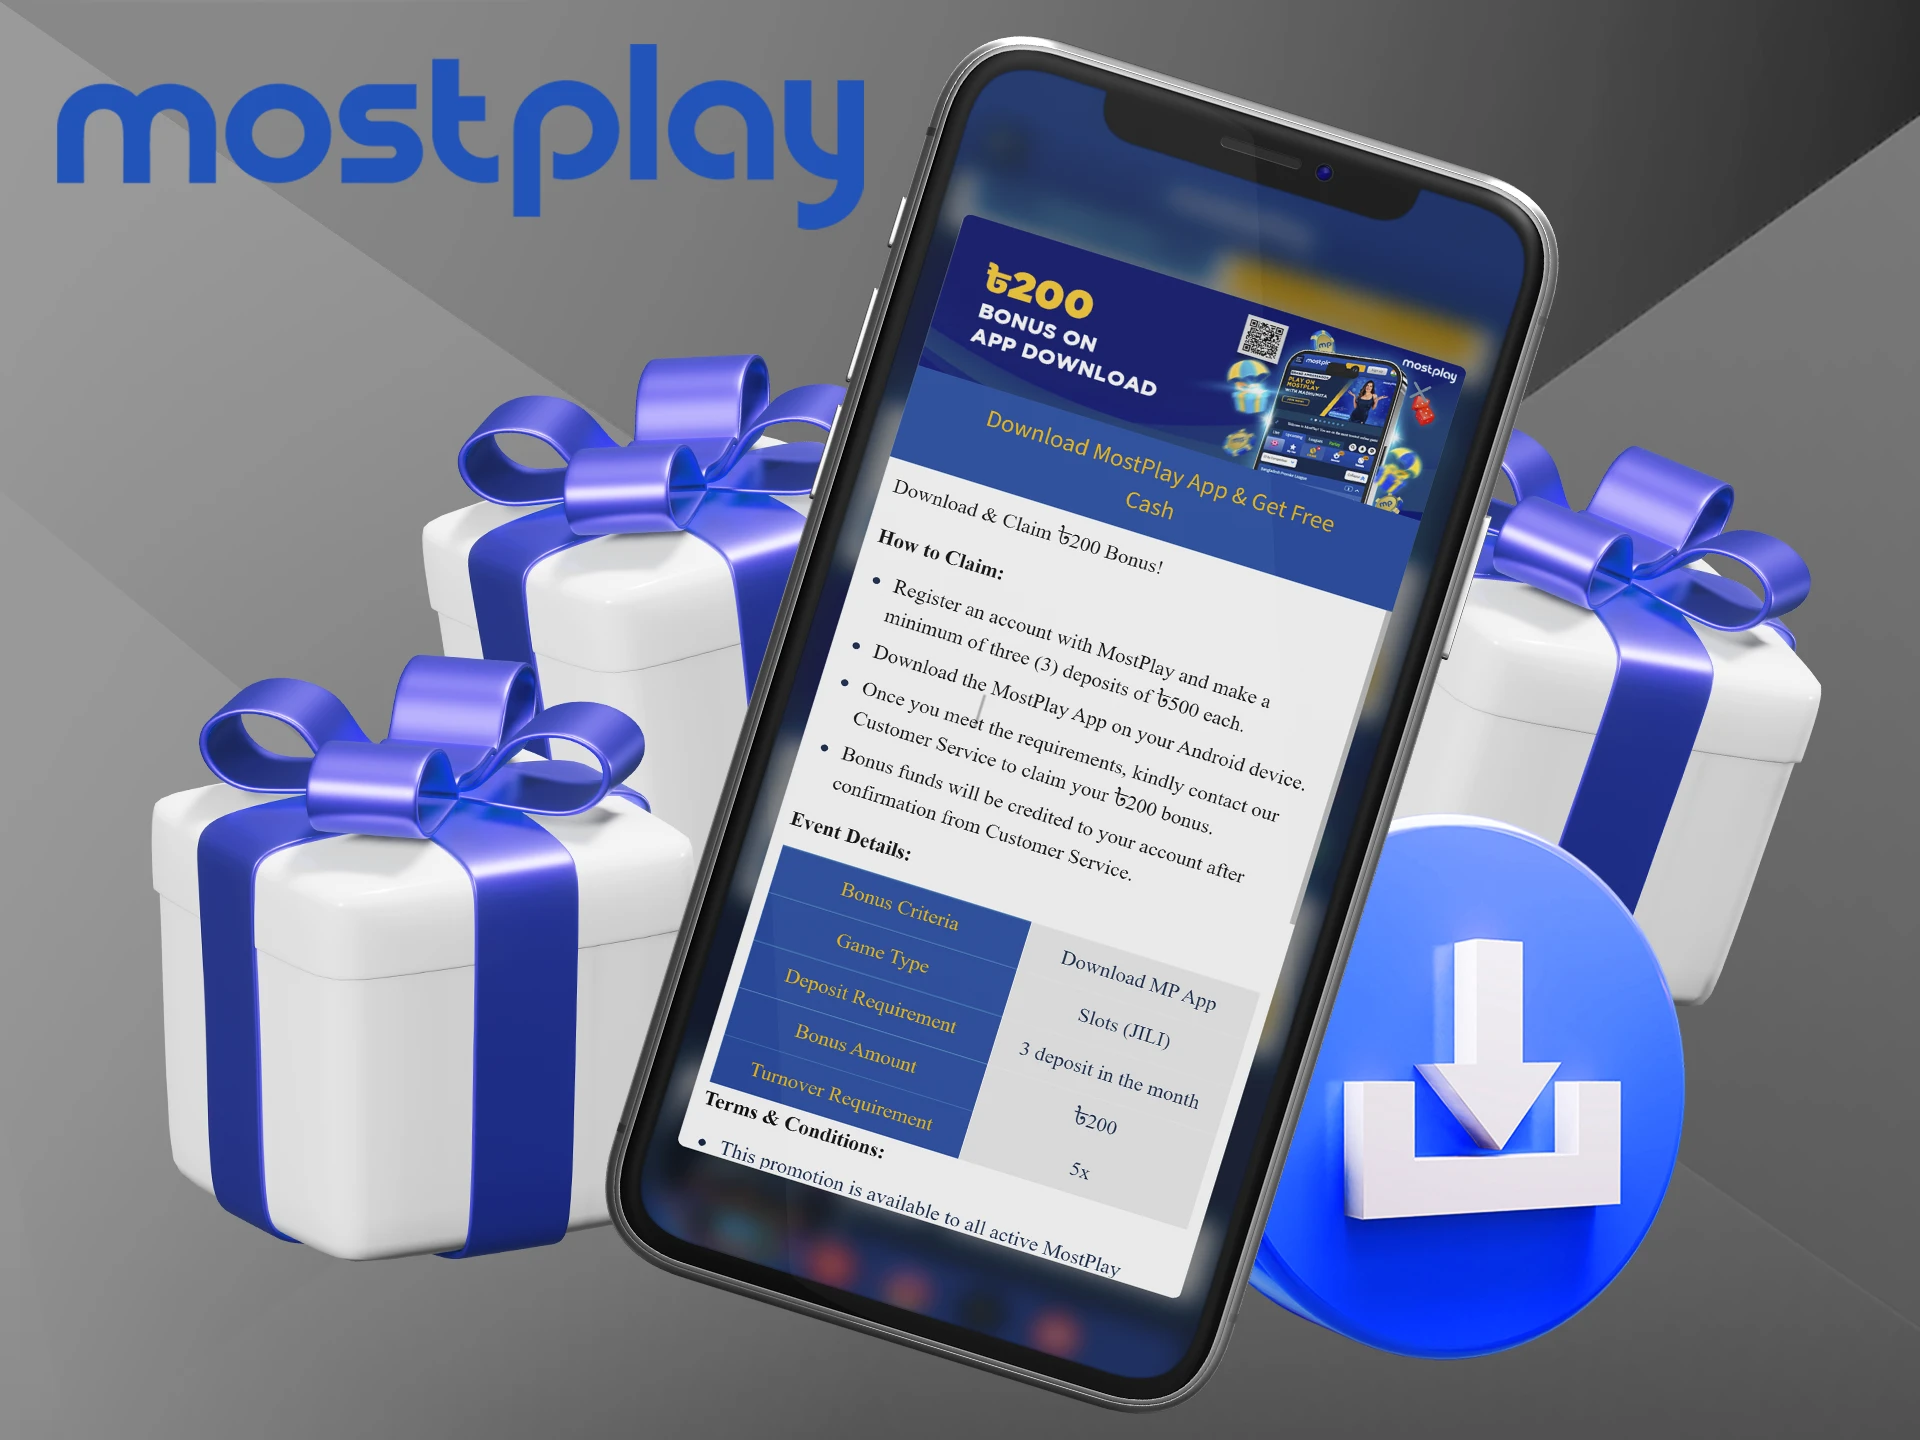 Download the Mostplay app and get a great bonus.